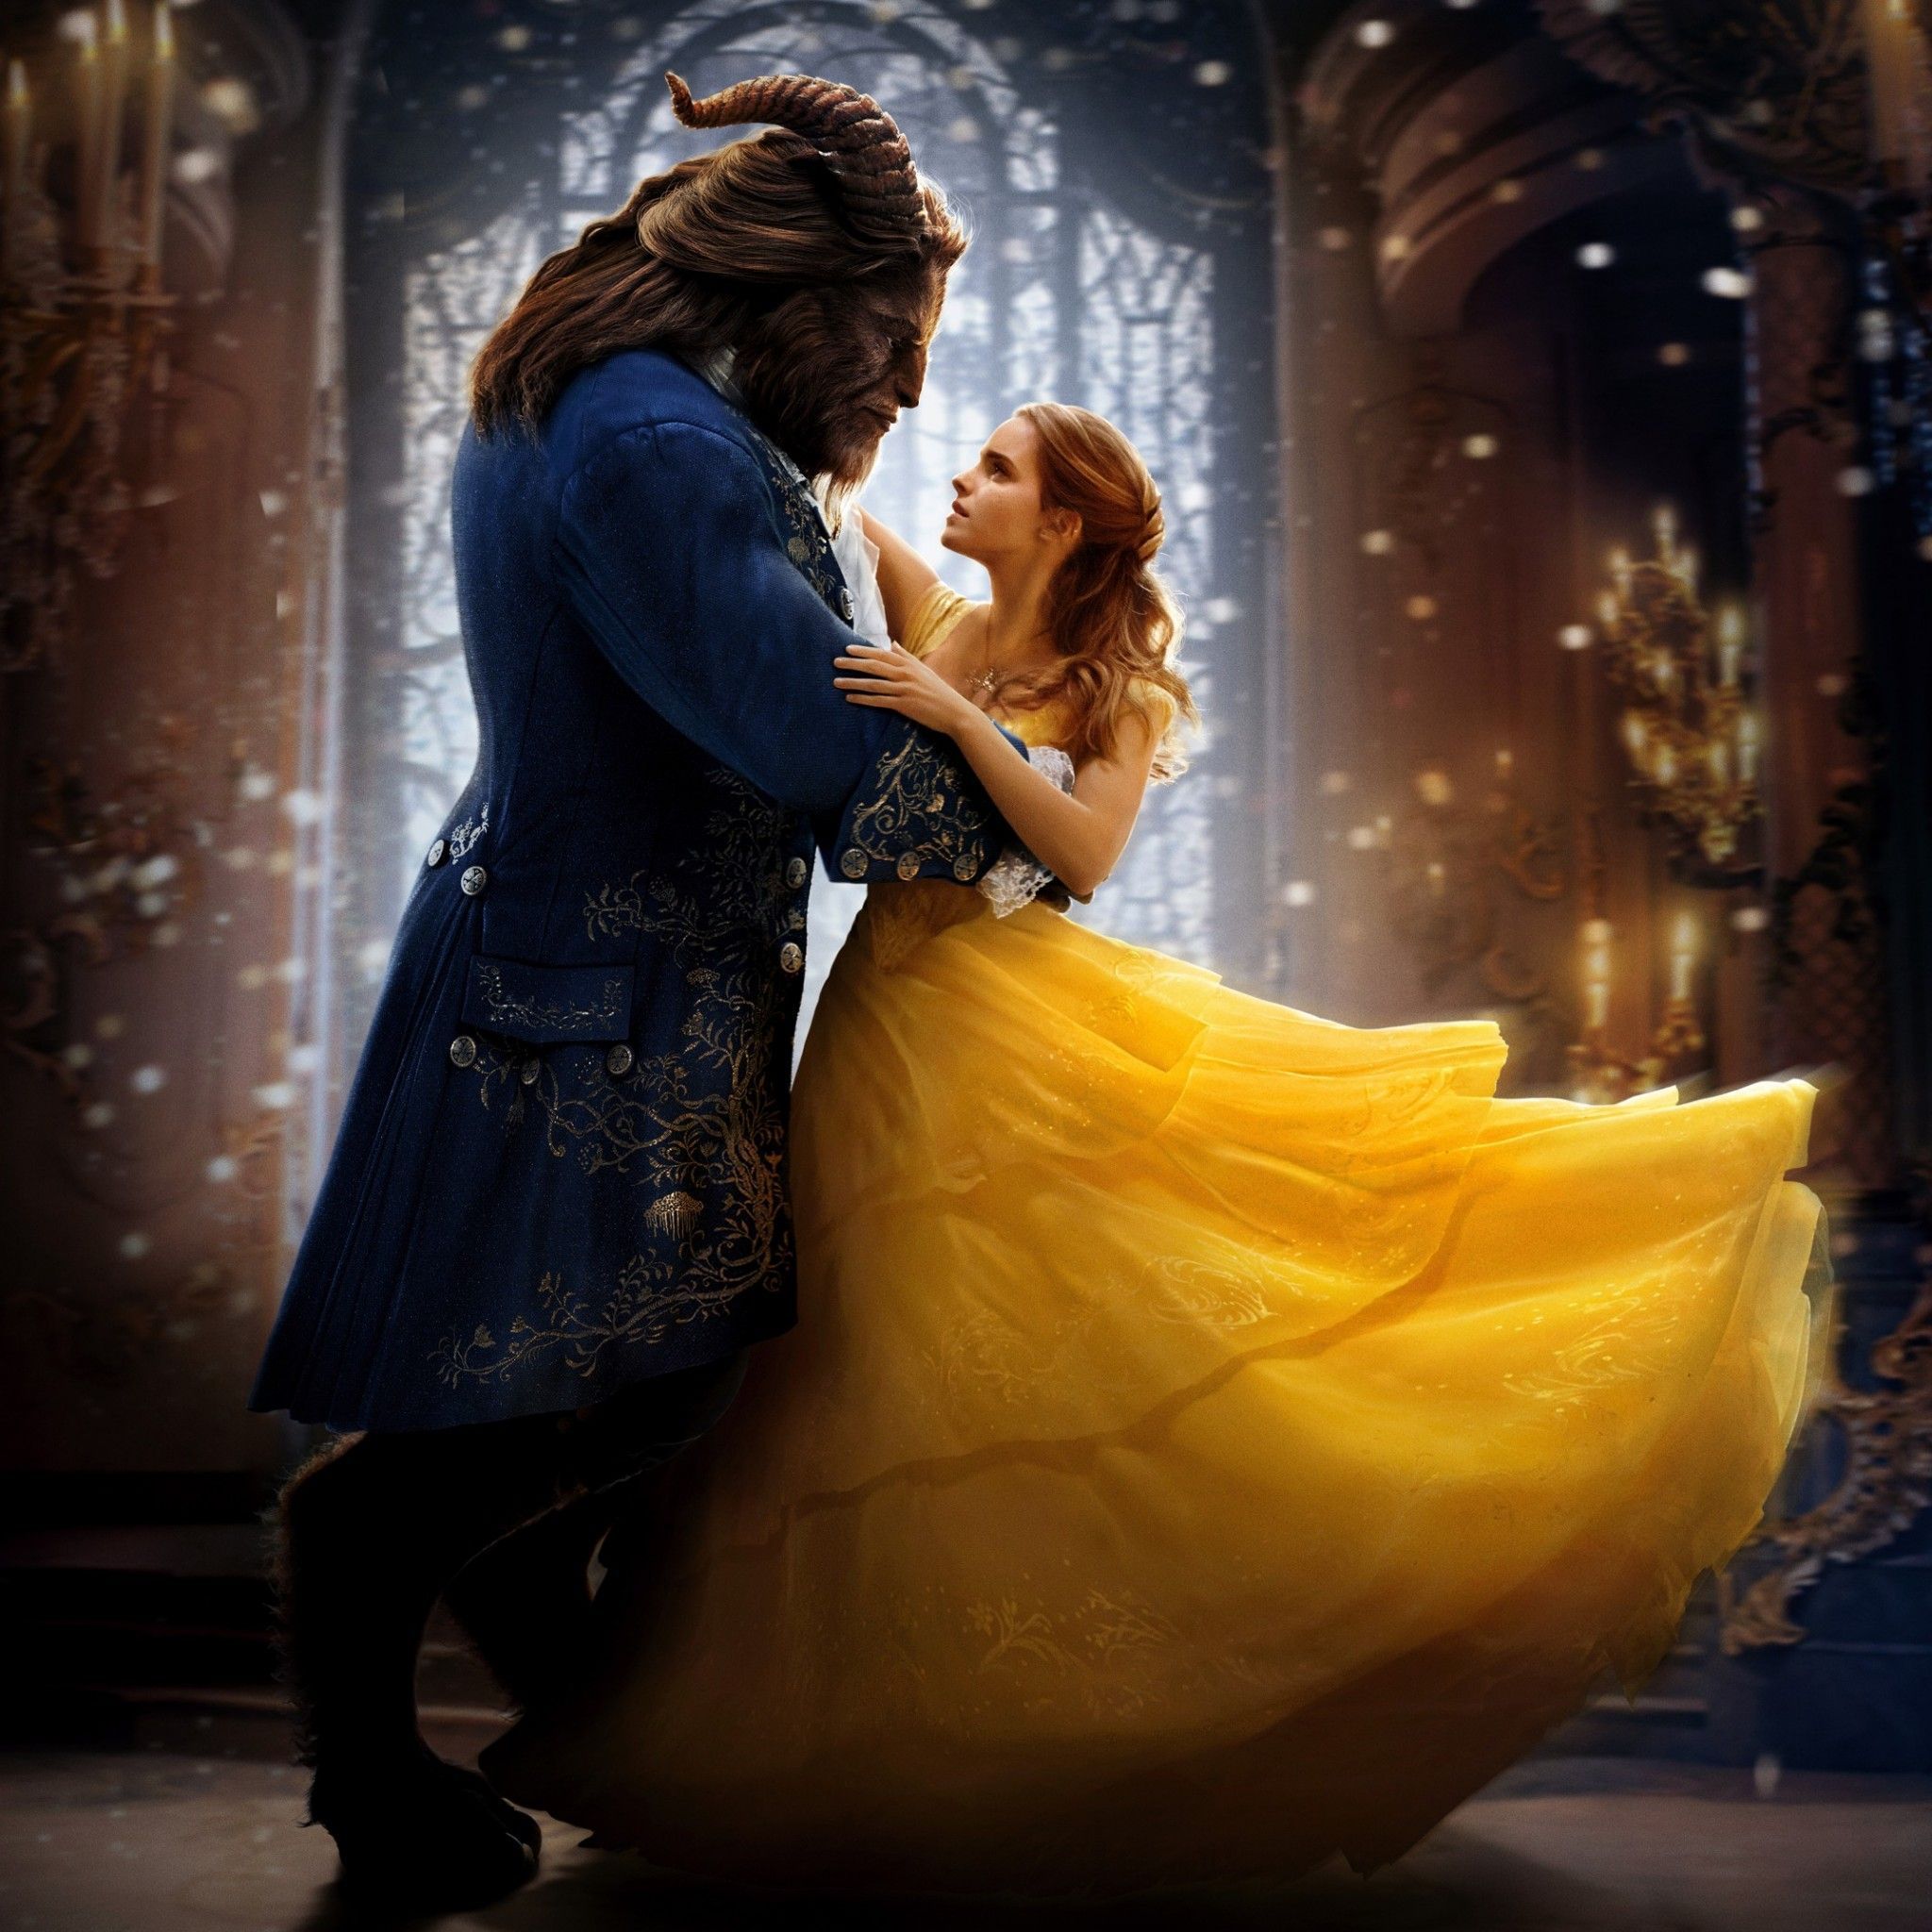 Aesthetic Beauty And The Beast Wallpaper